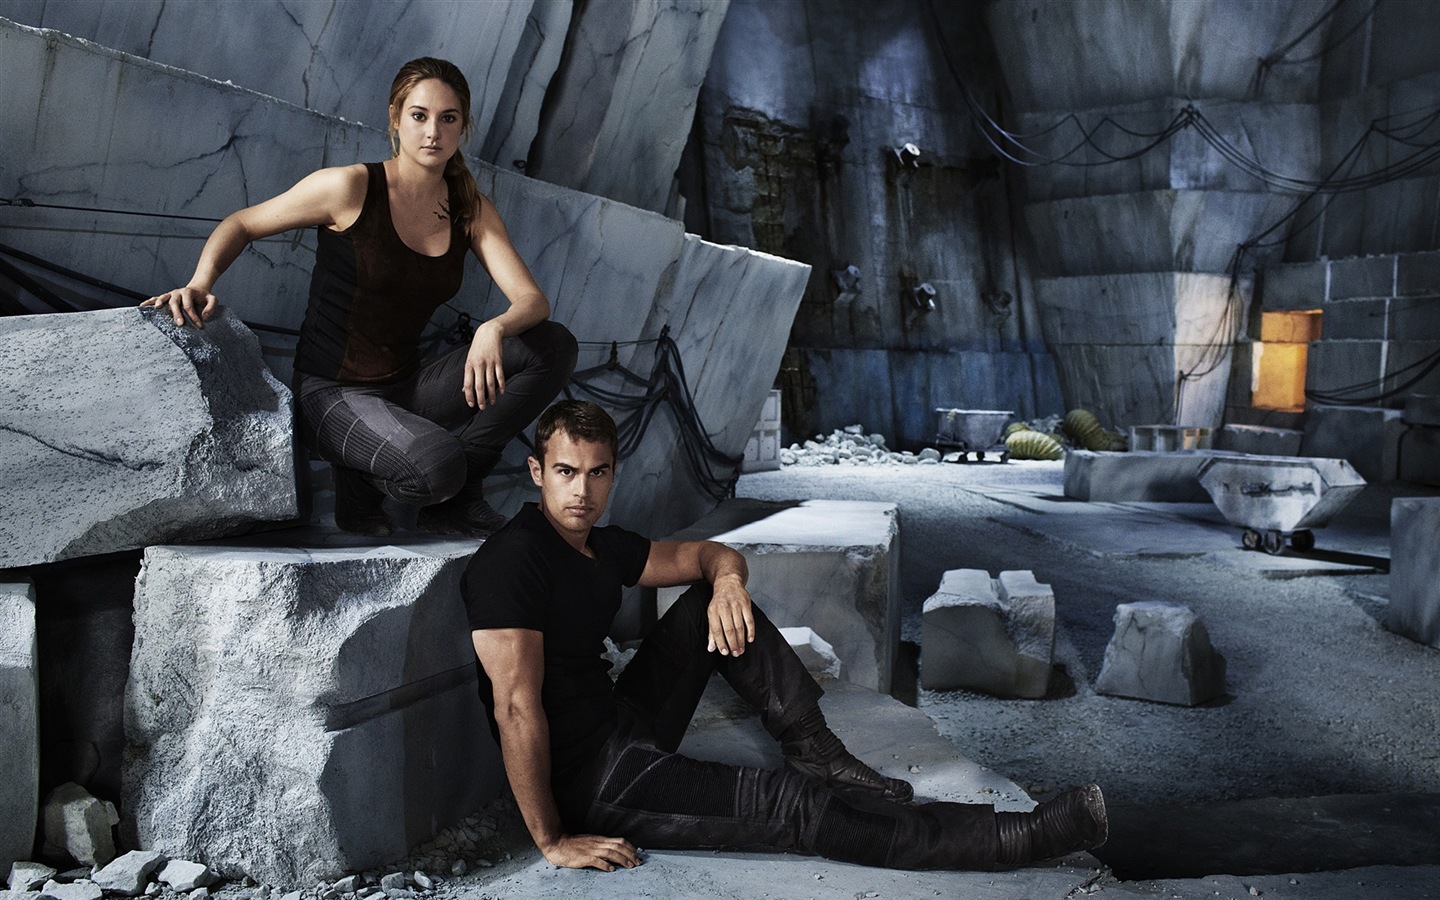 Divergent movie HD wallpapers #13 - 1440x900